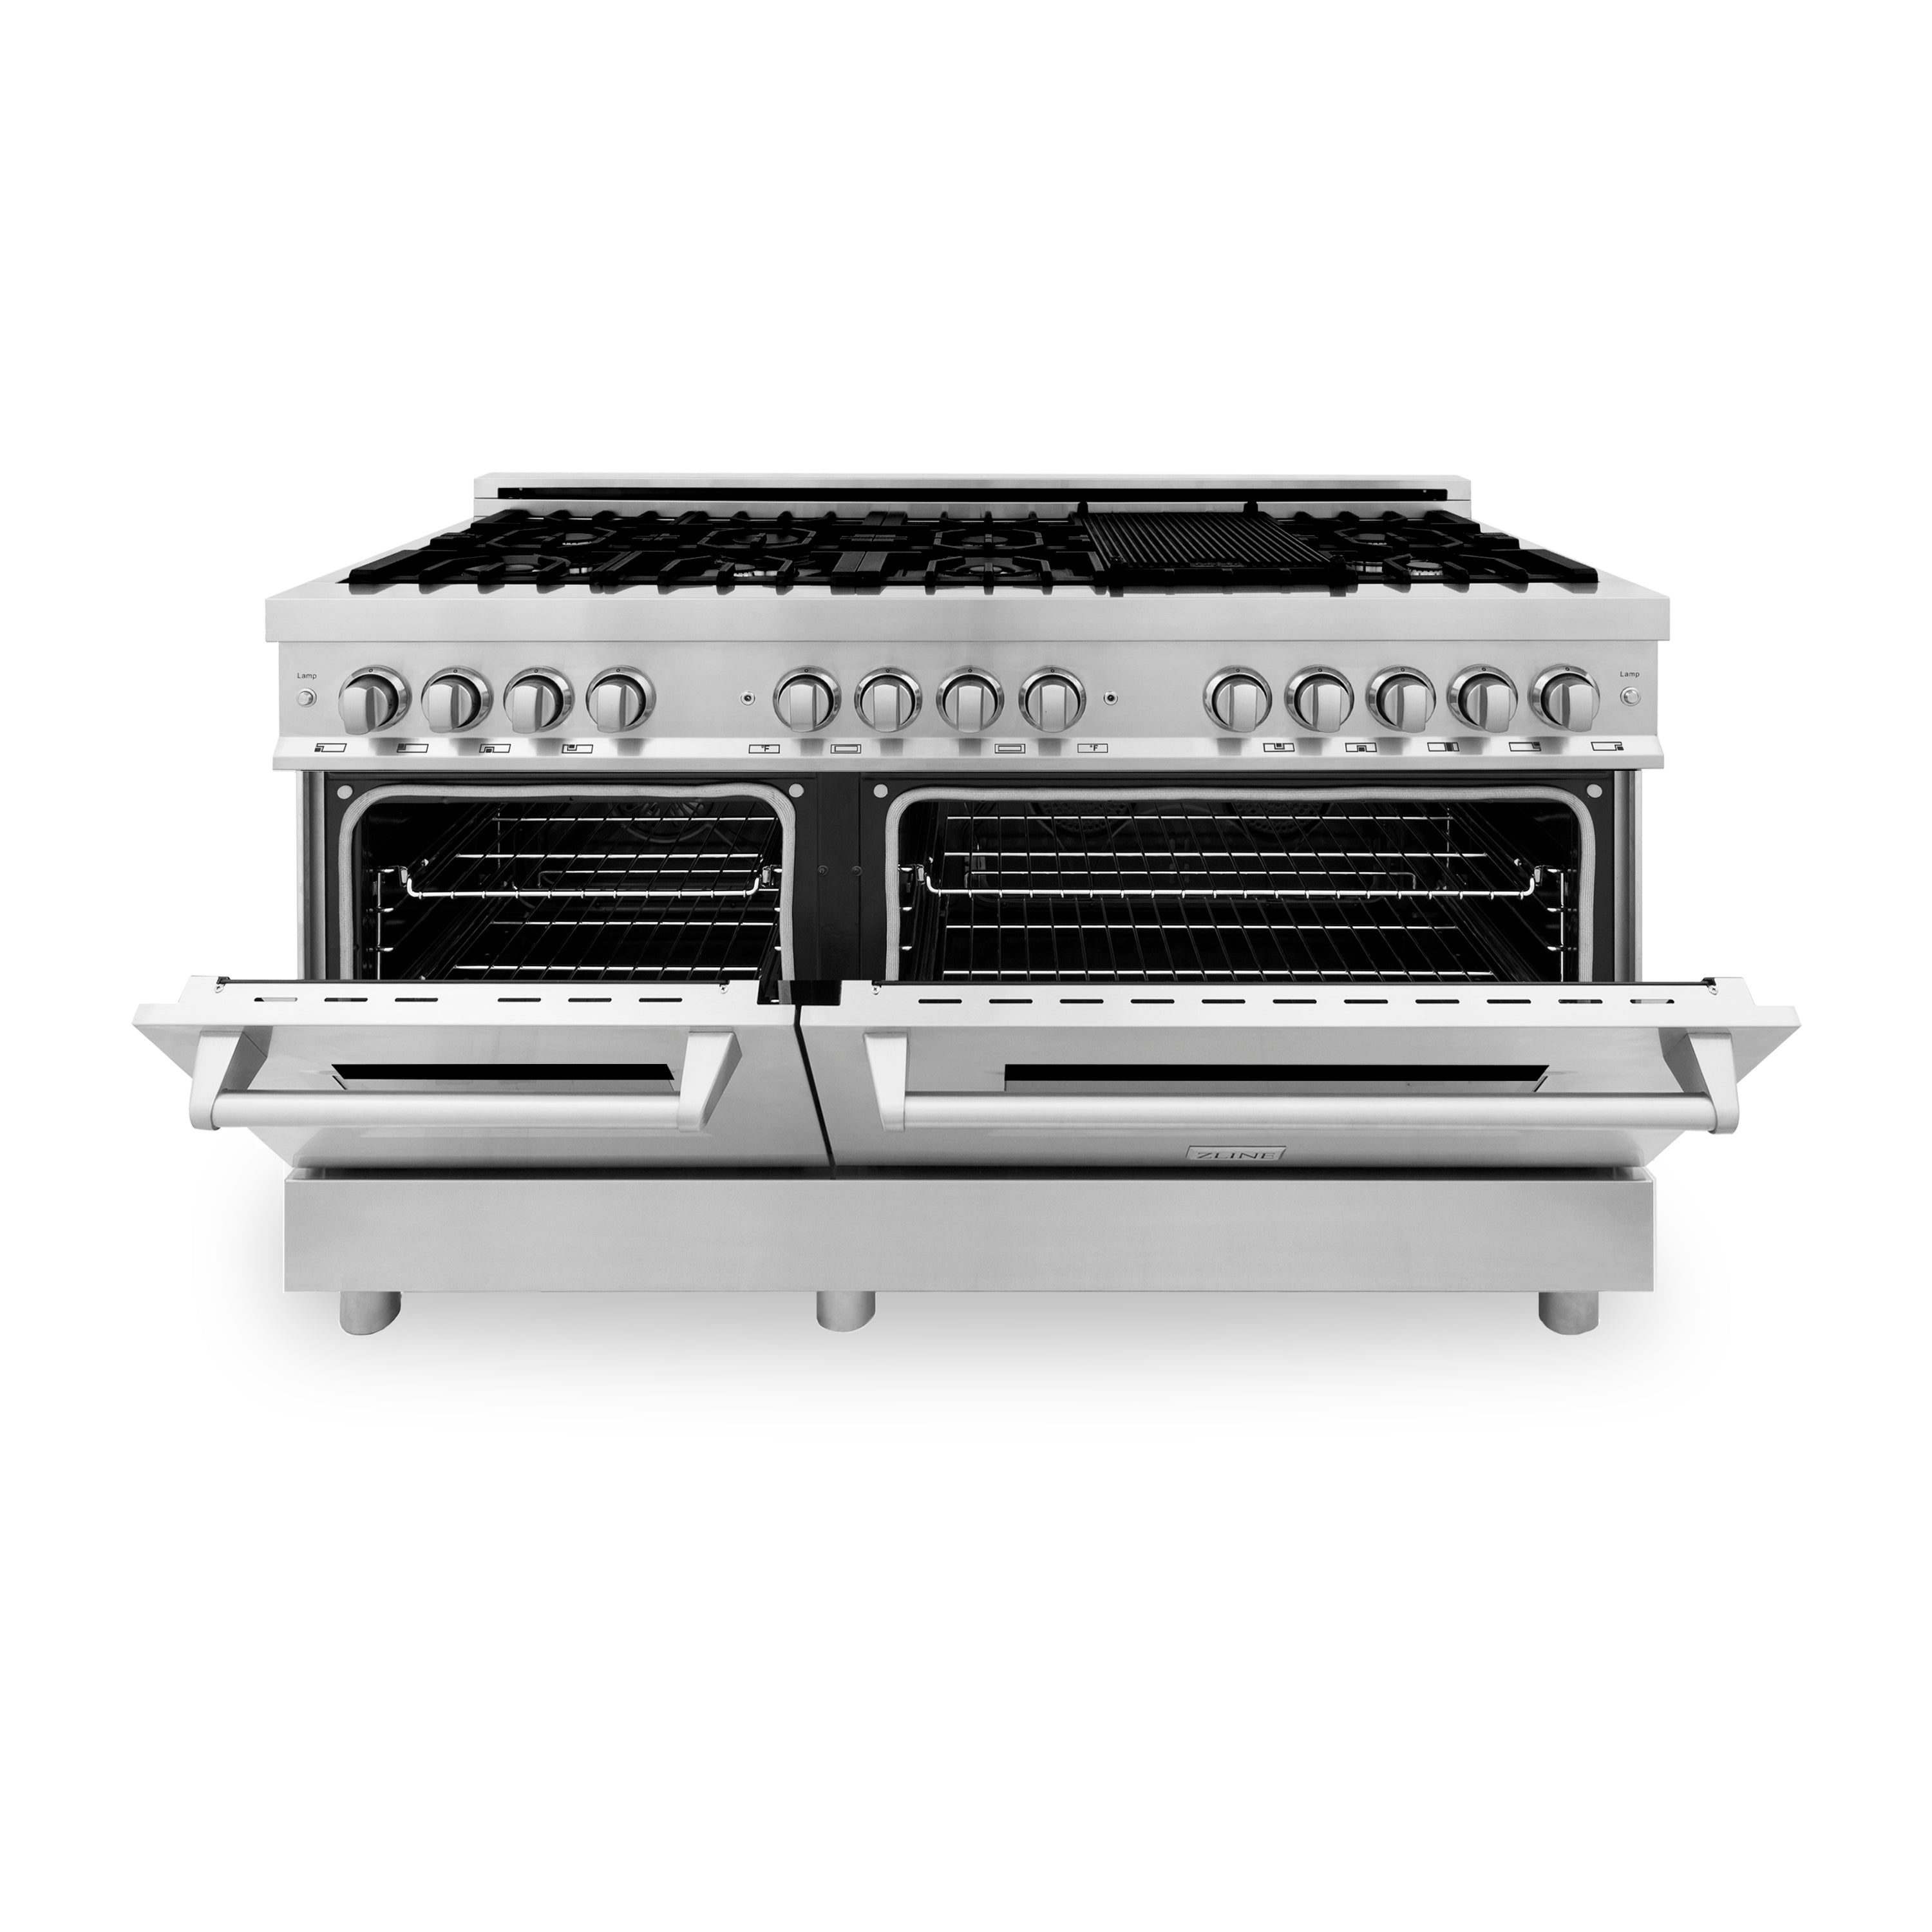 ZLINE 60" 7.4 cu. ft. Dual Fuel Range with Gas Stove and Electric Oven in Stainless Steel (RA60)